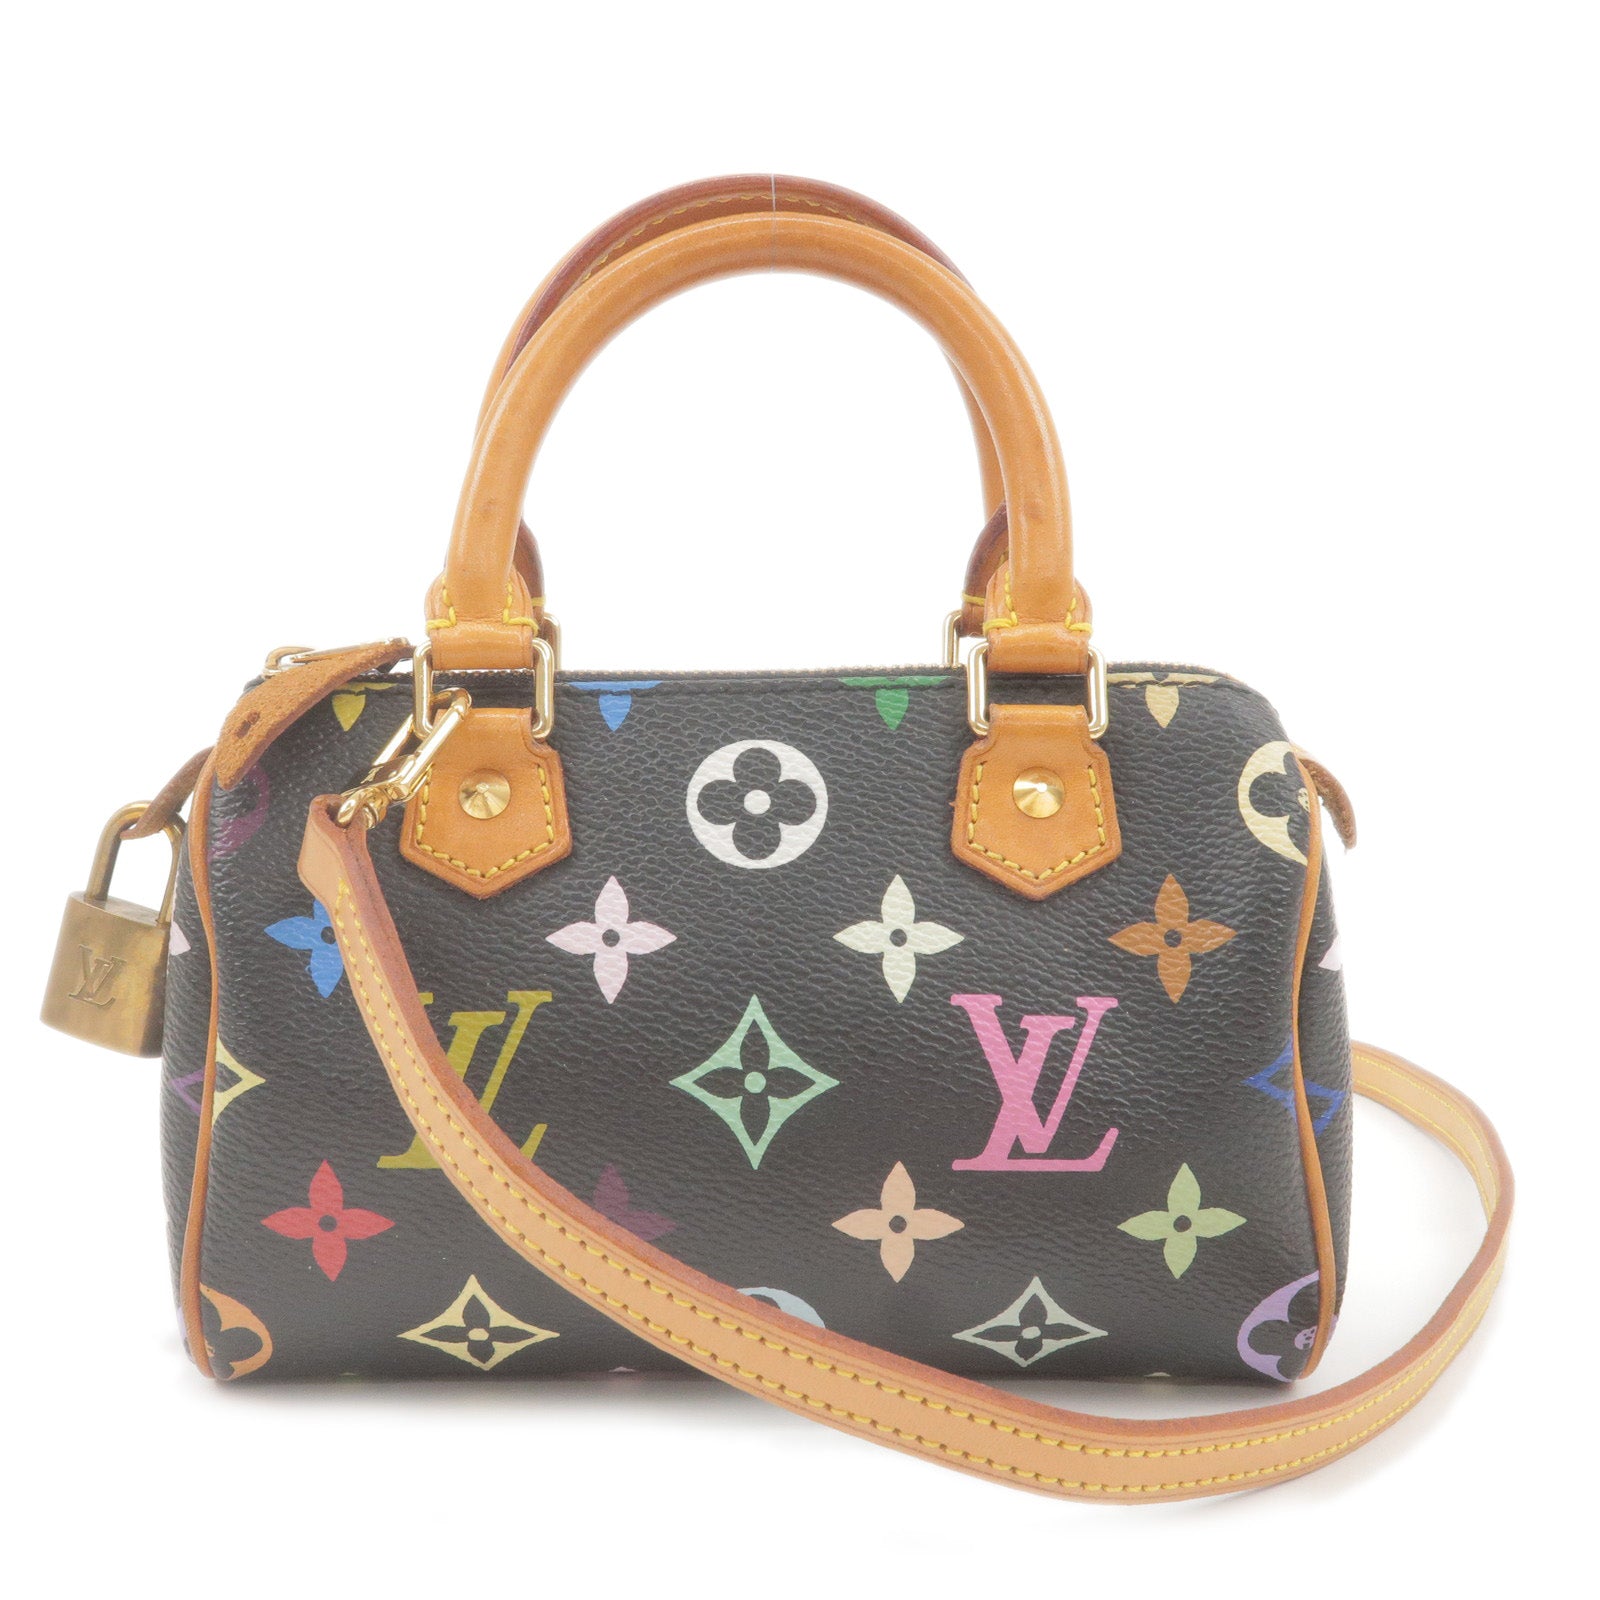 Louis Vuitton Speedy Bandouliere 25 in Monogram/Storage/Try-on/Mini-Review  